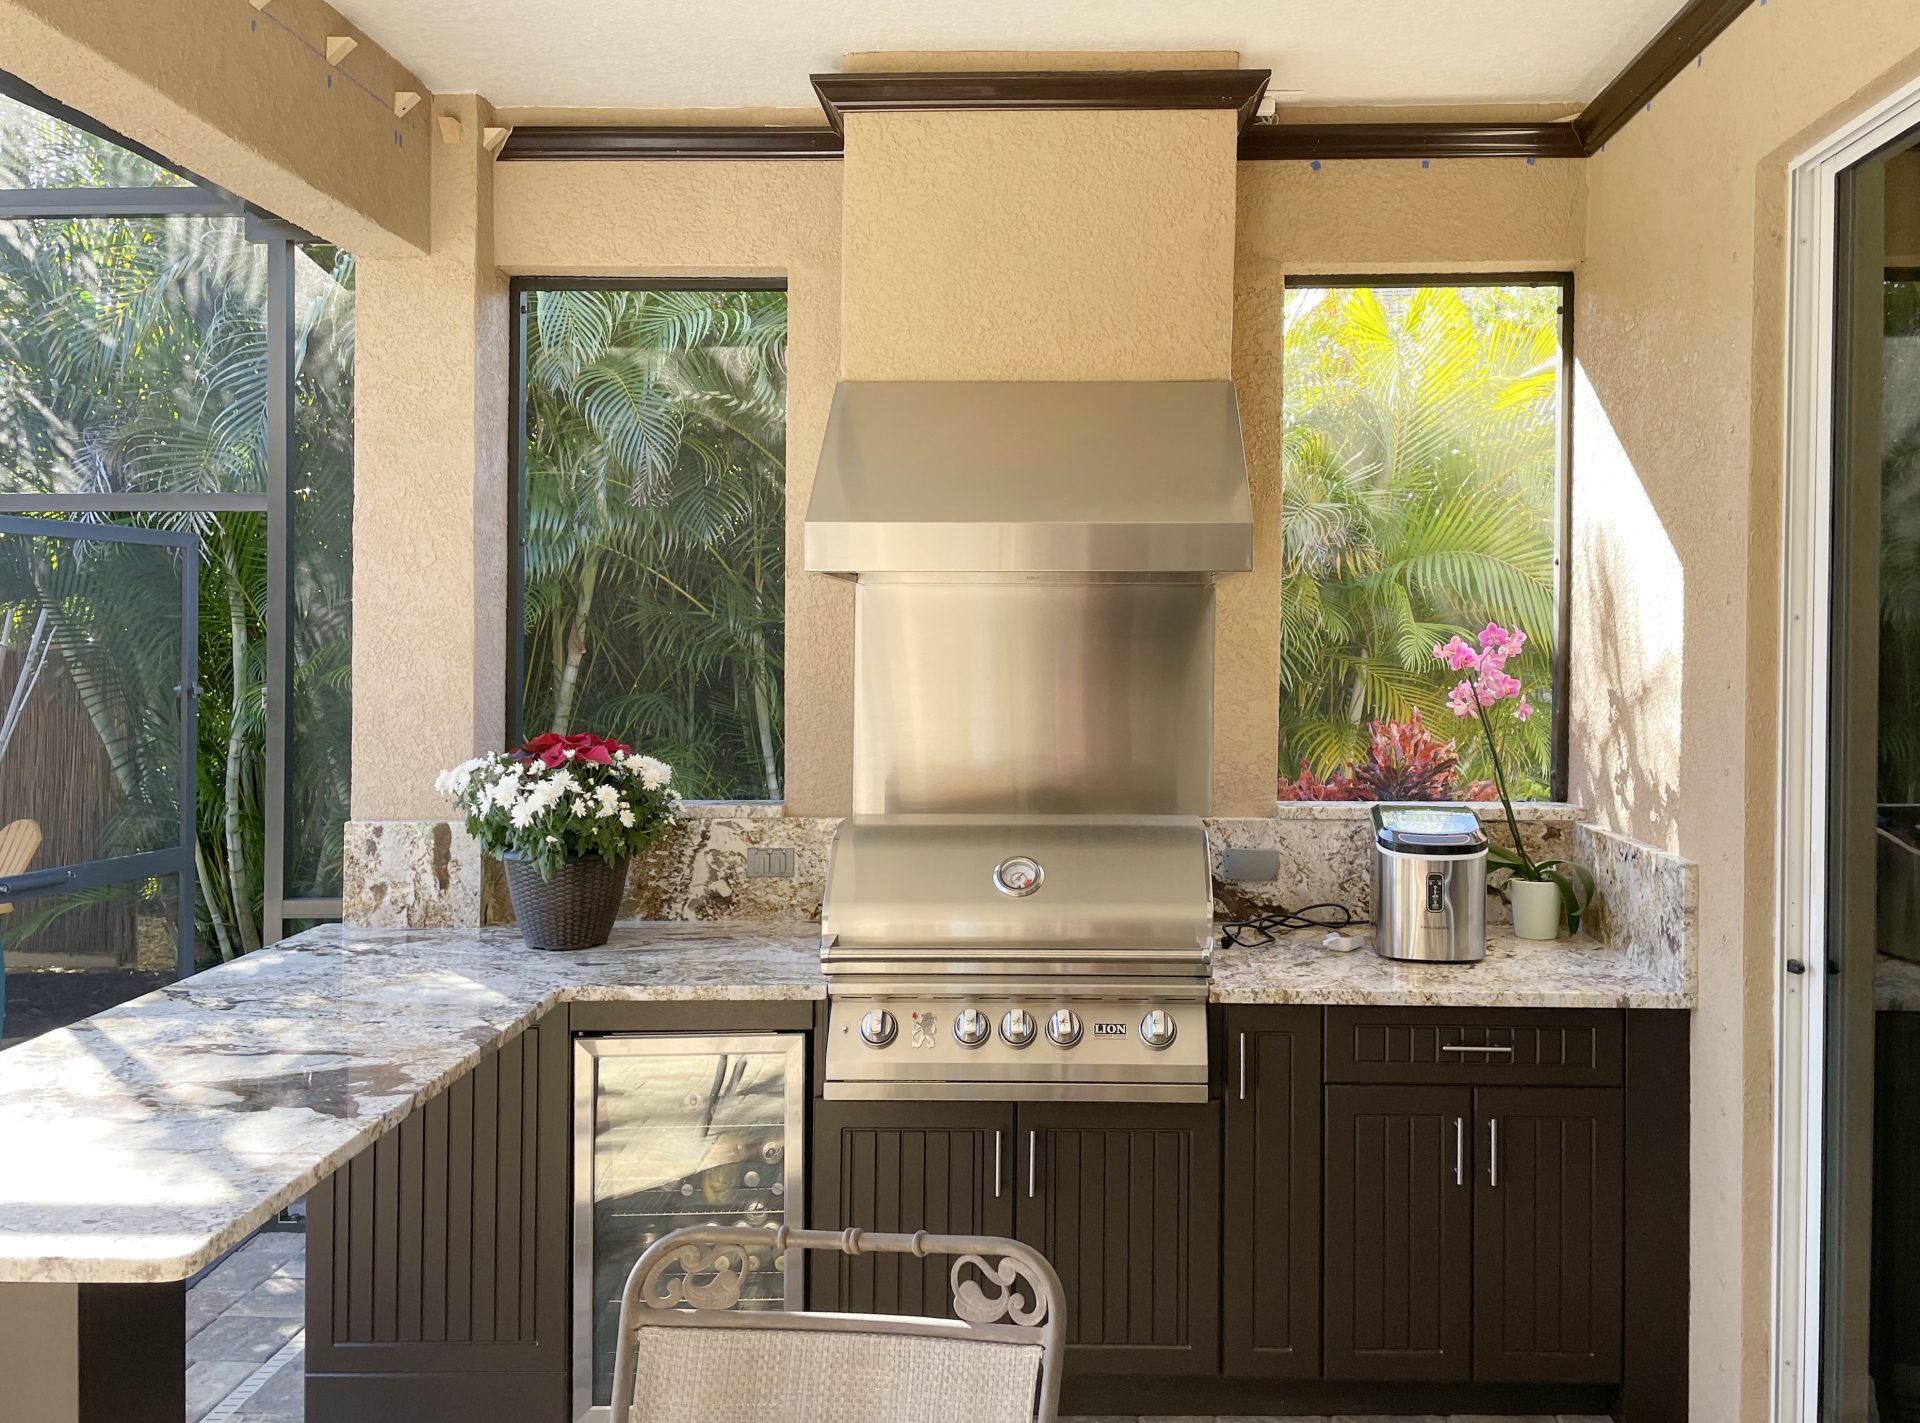 OUTDOOR KITCHEN 34. Custom outdoor kitchen in Parris, FL. Kitchen features dark brown, v-groove style cabinets. Appliances include Lion grill, Cypress outdoor hood, stucco hood chase, glass front refrigerator and stainless backsplash & bar pulls.